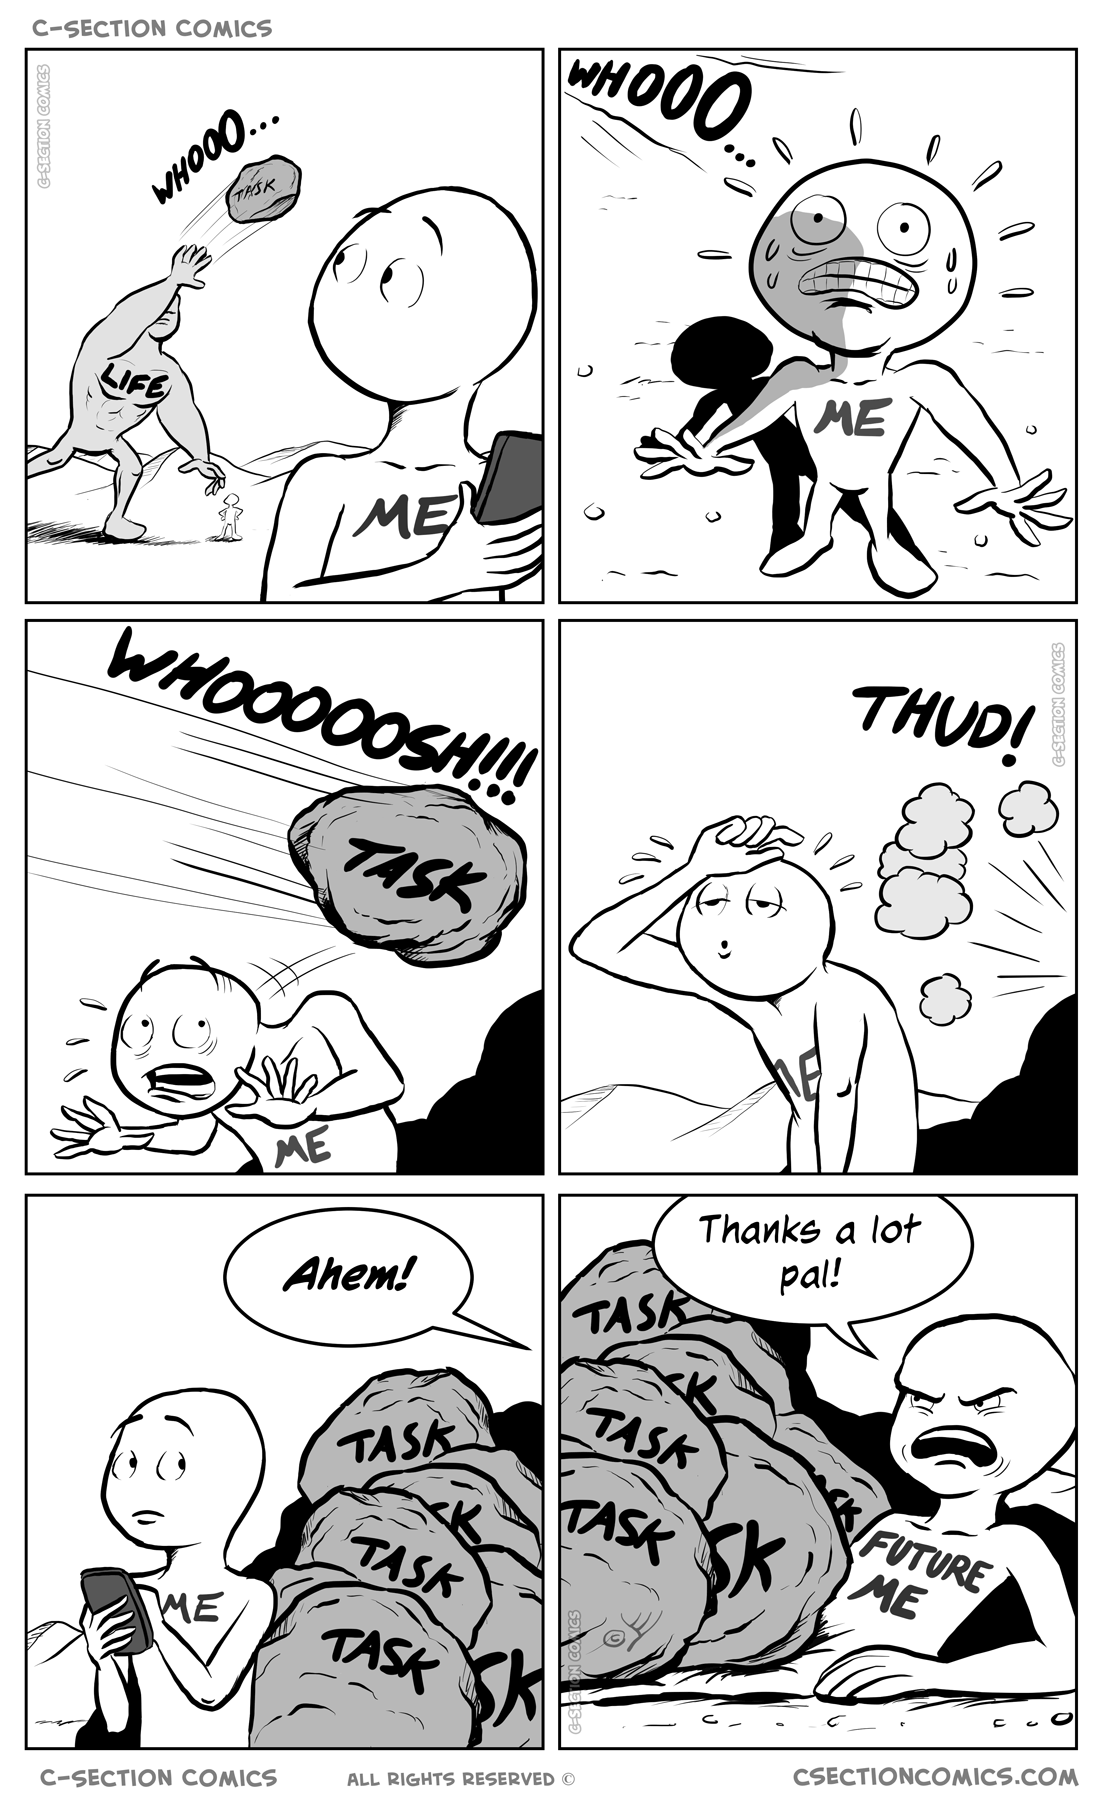 Tasks Dodging - by C-Section Comics